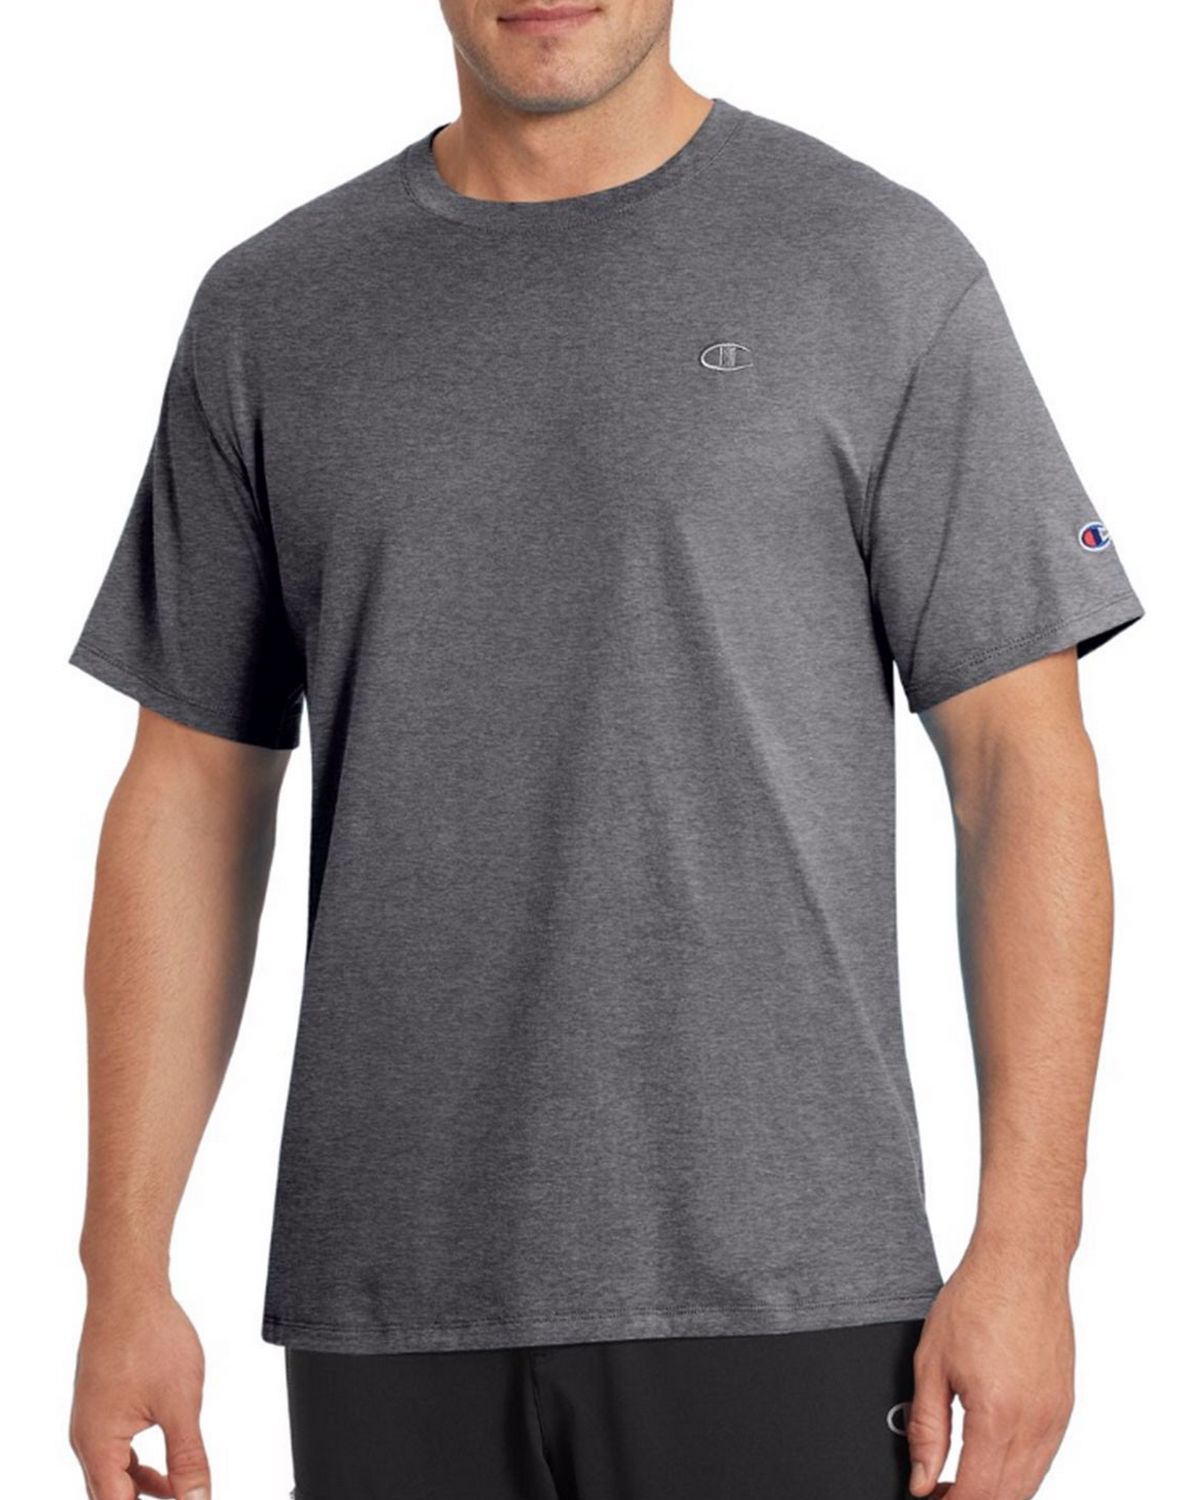 Champion Mens Classic Jersey Tee T-Shirt Athletic Fit Short Sleeve 0223 Black XL 